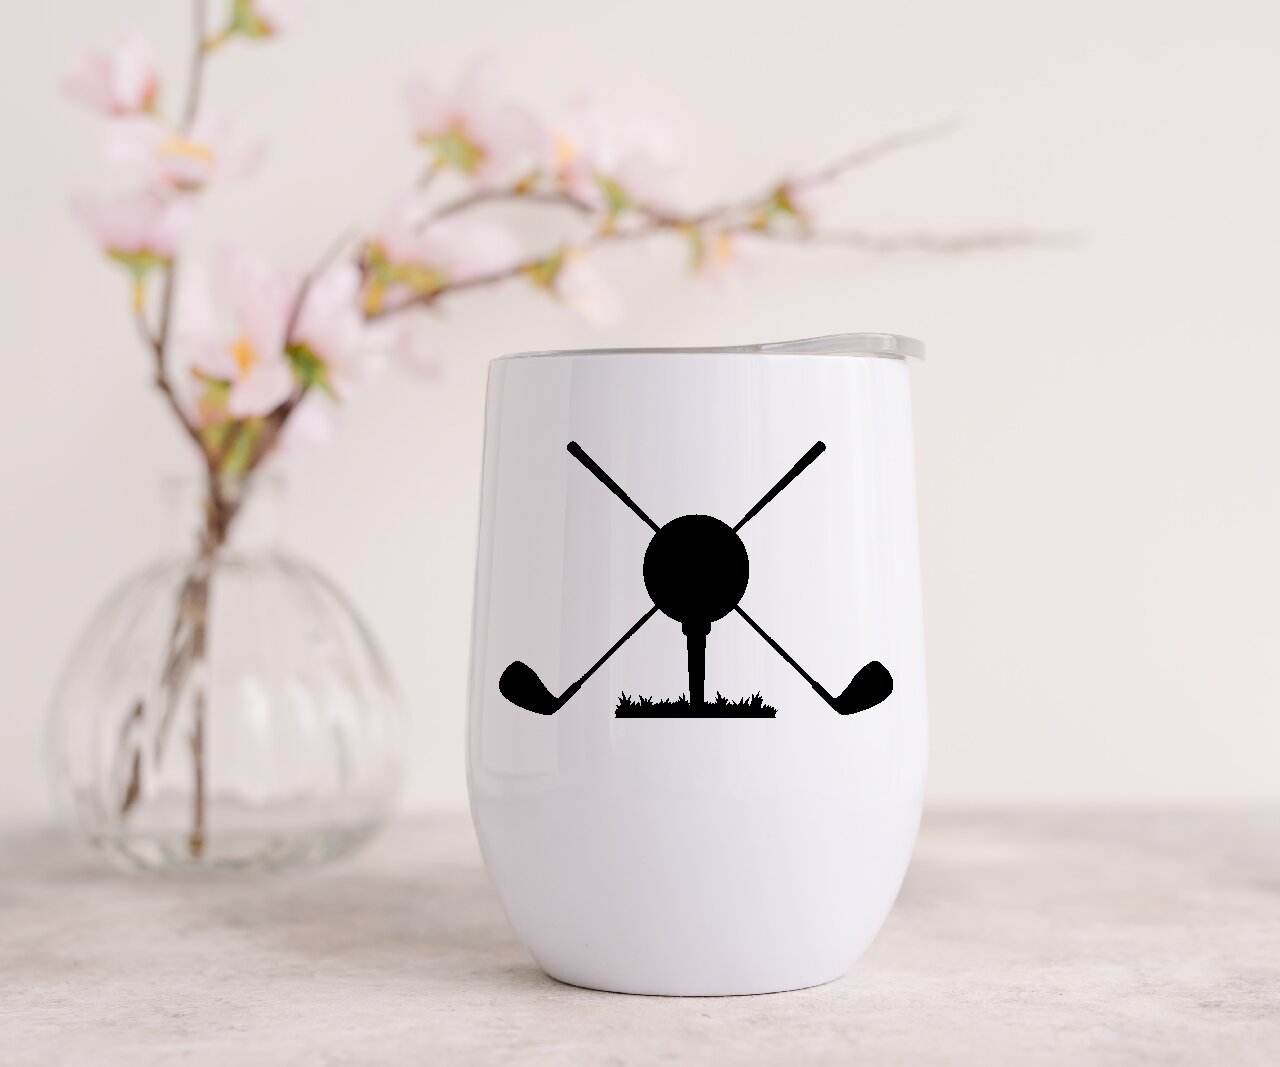 Golf Clubs & Ball 1 - Wine Tumbler  (Personalised with your name).